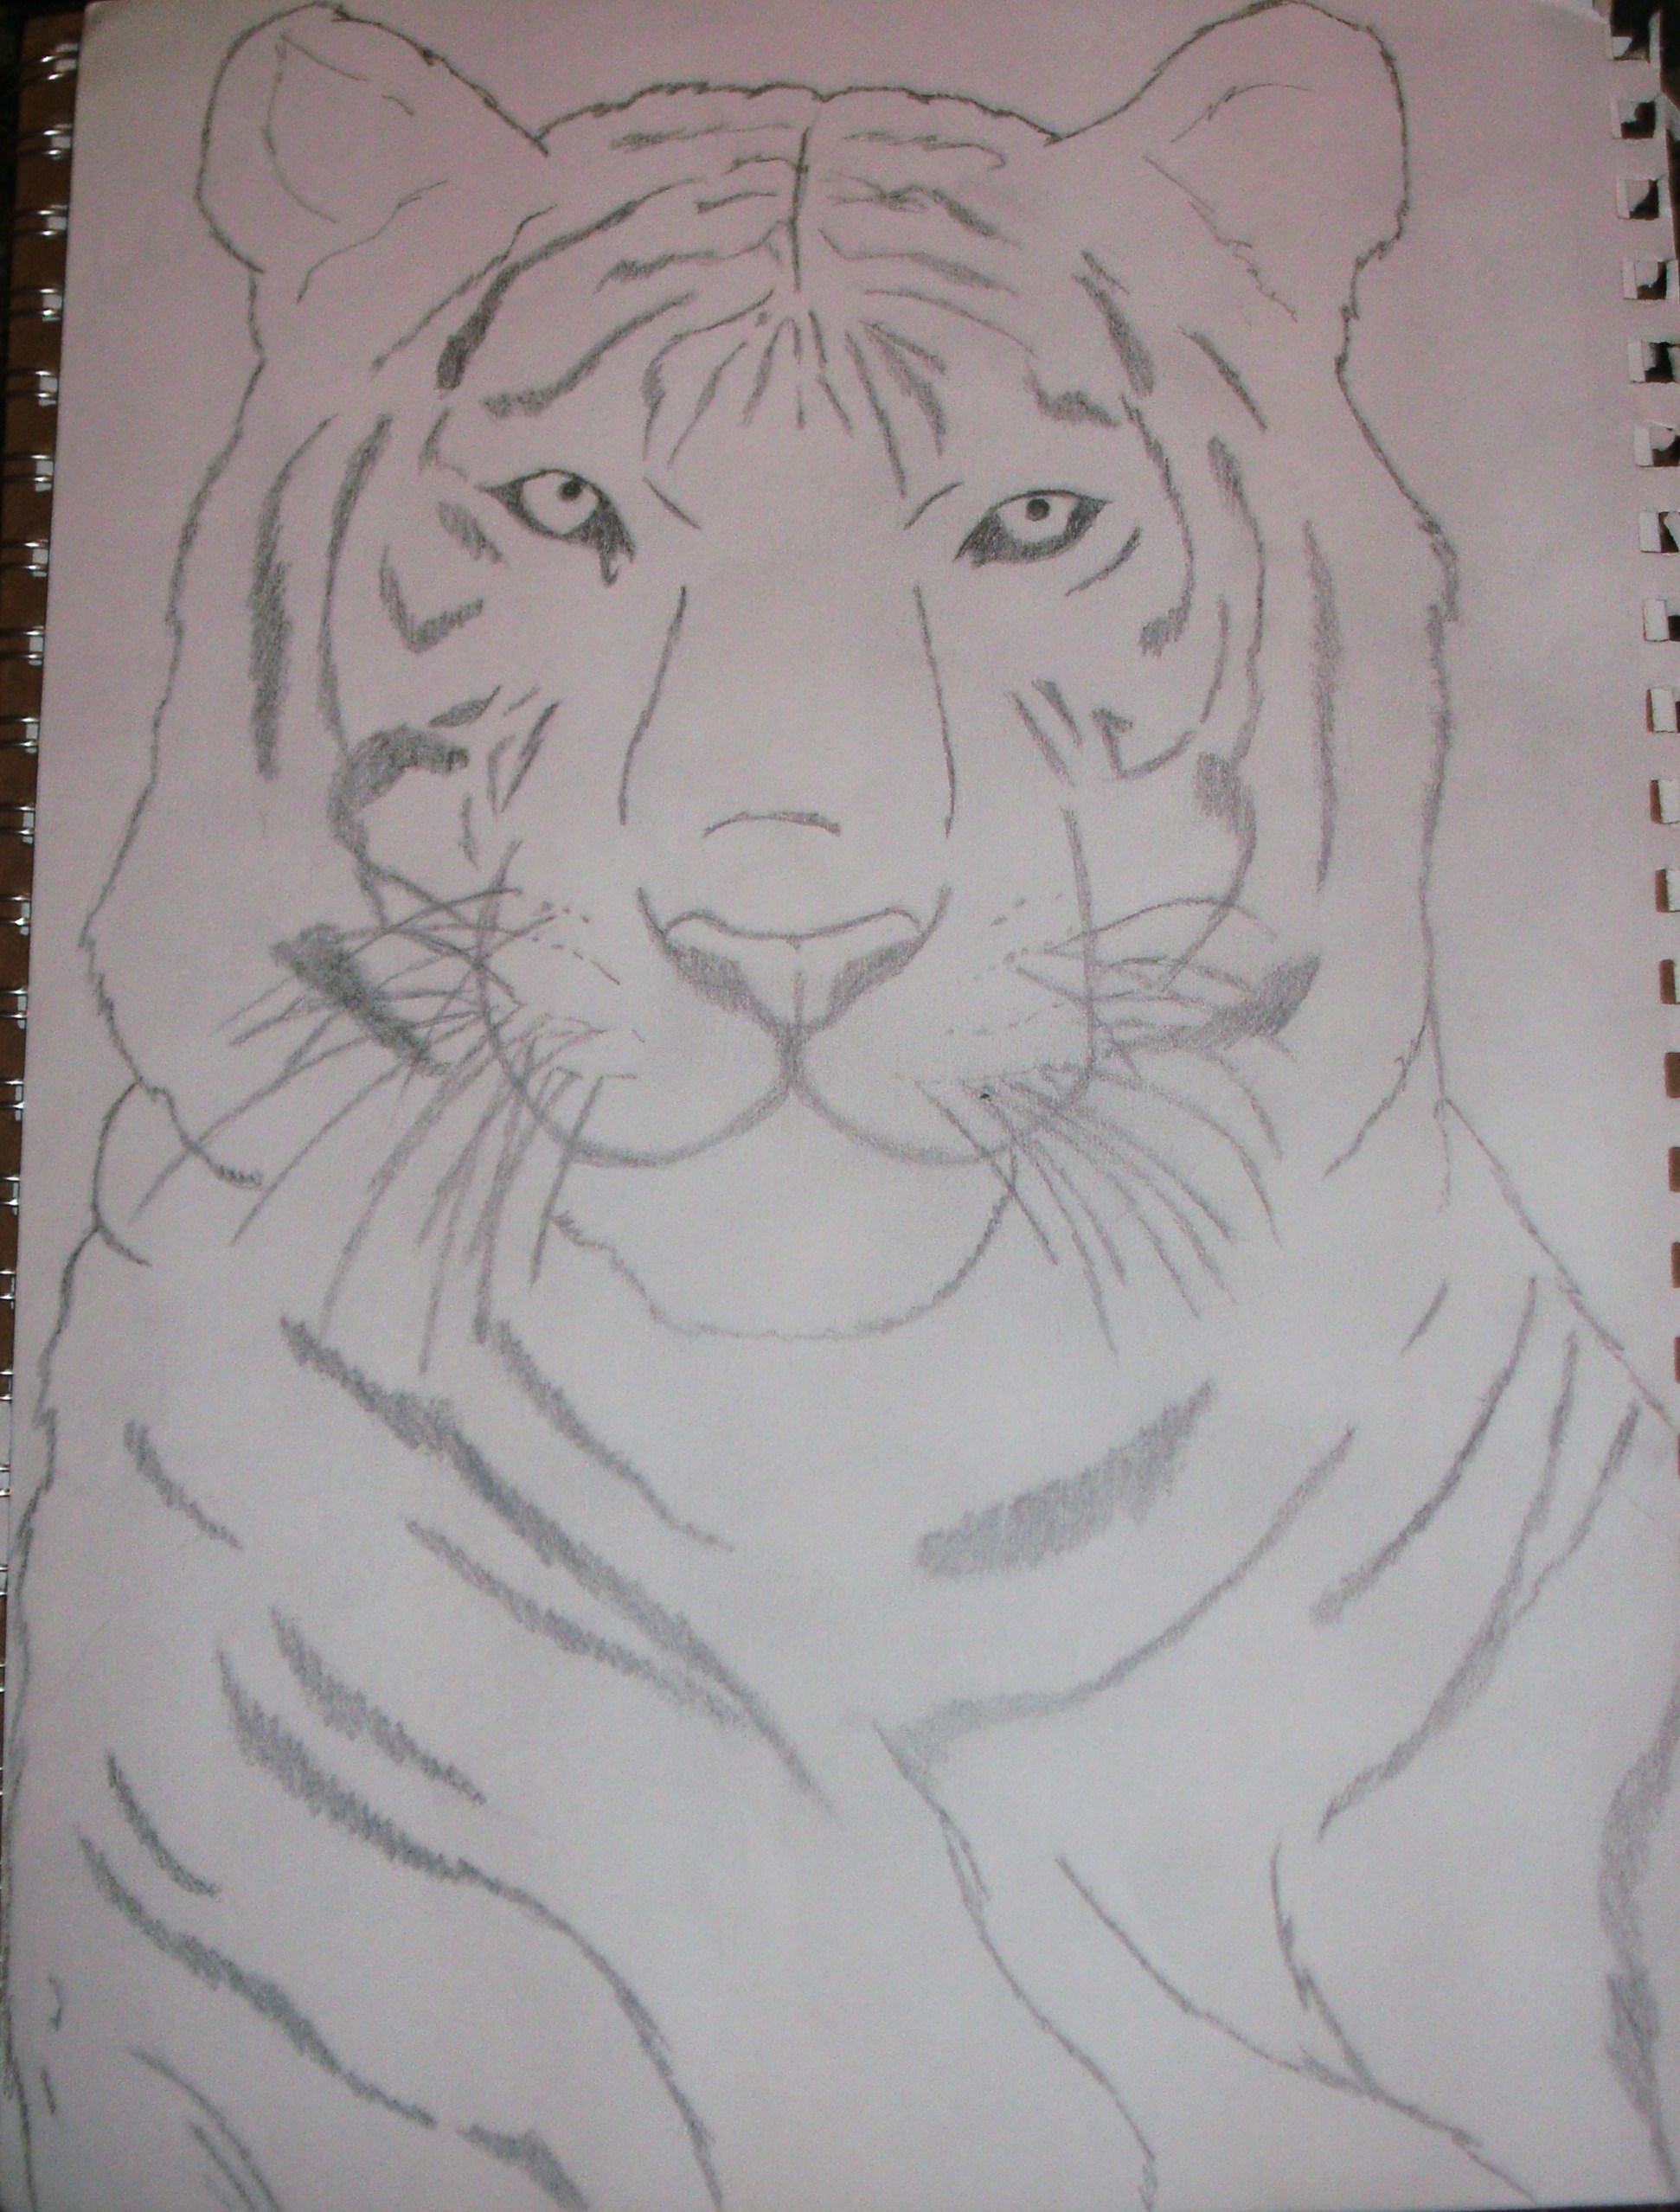 White Tiger Drawing - AnnaR © 2015 - Aug 22, 2011